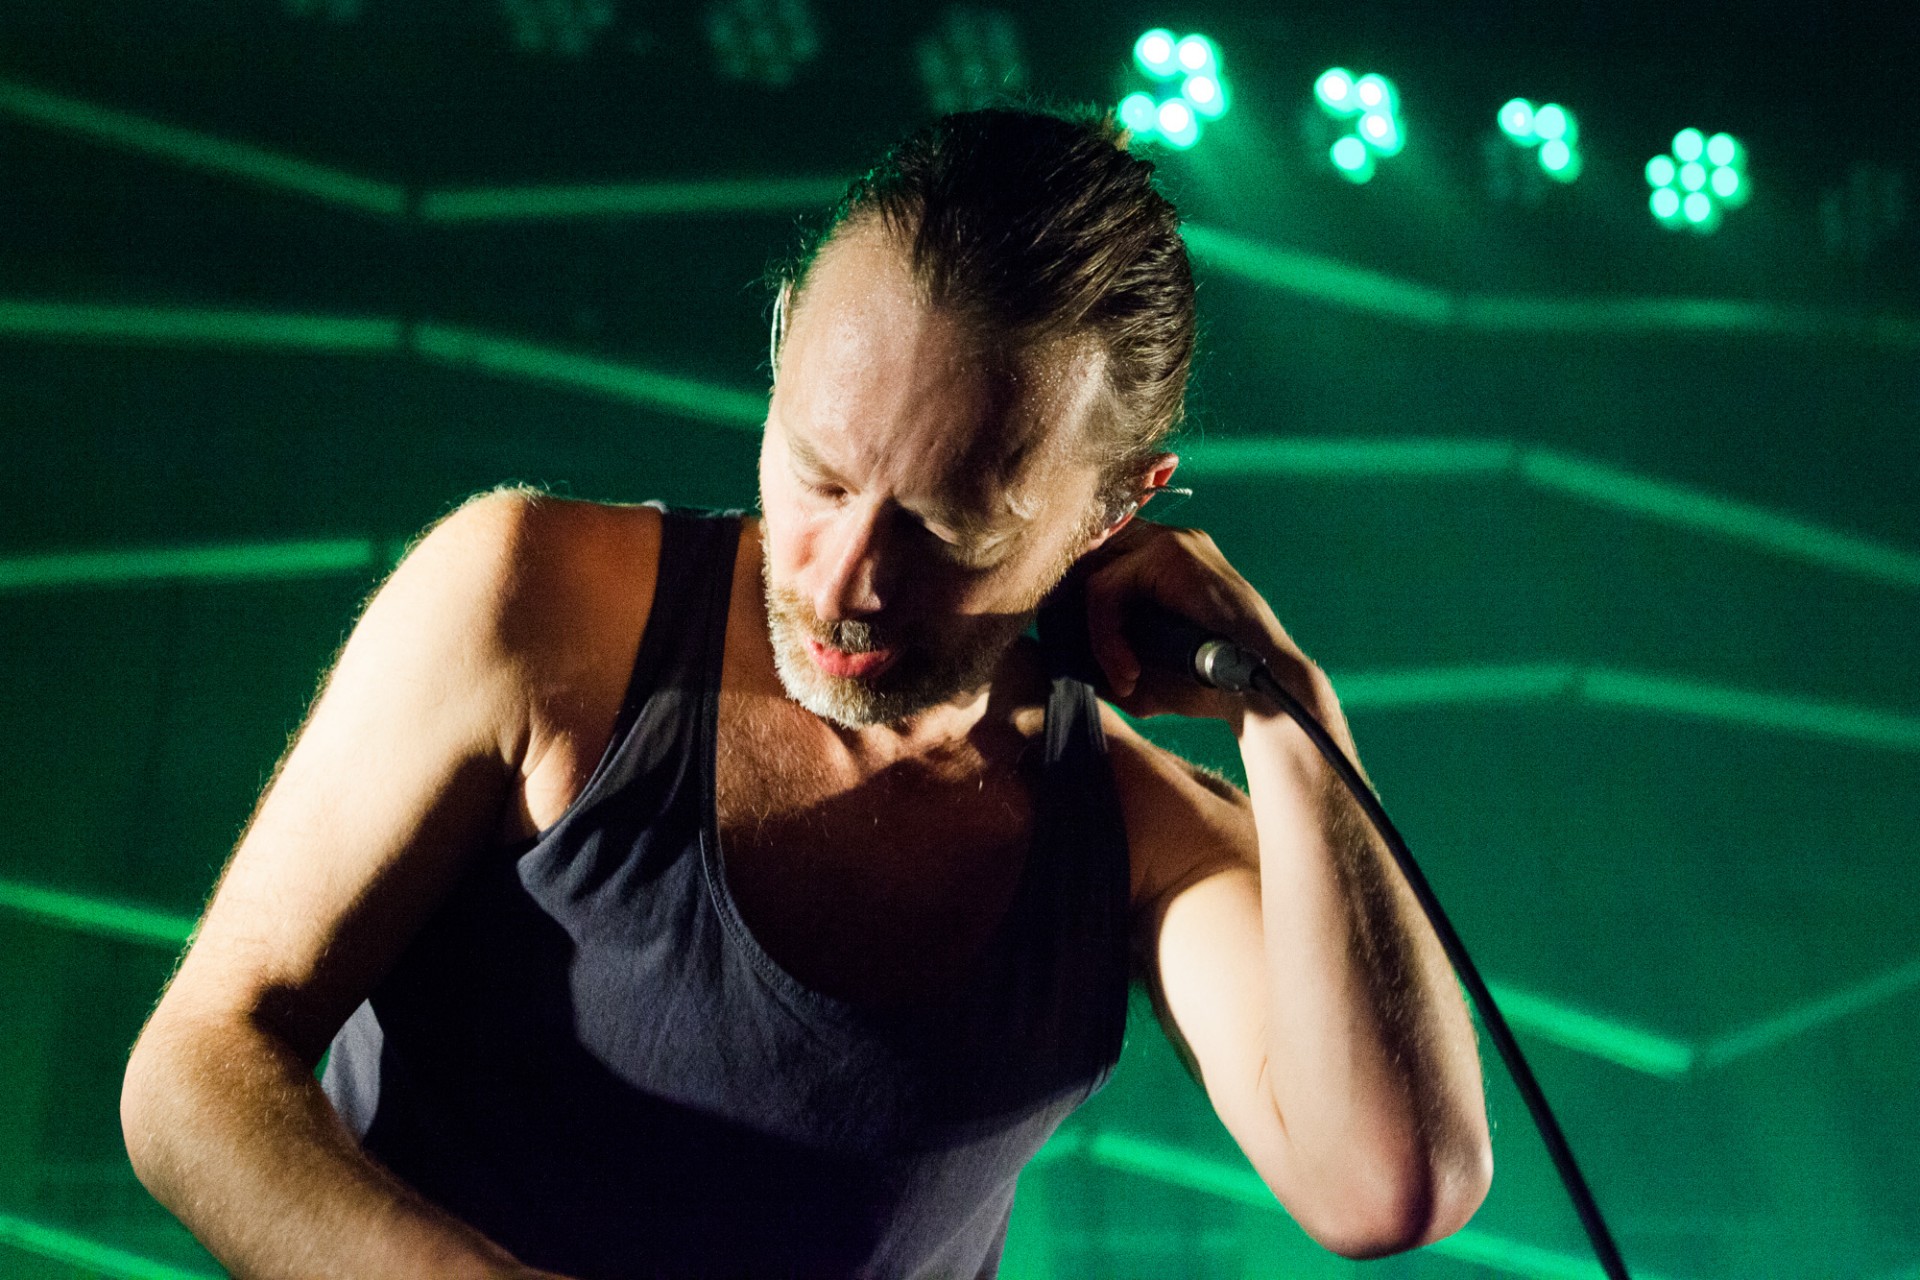 ATOMS FOR PEACE